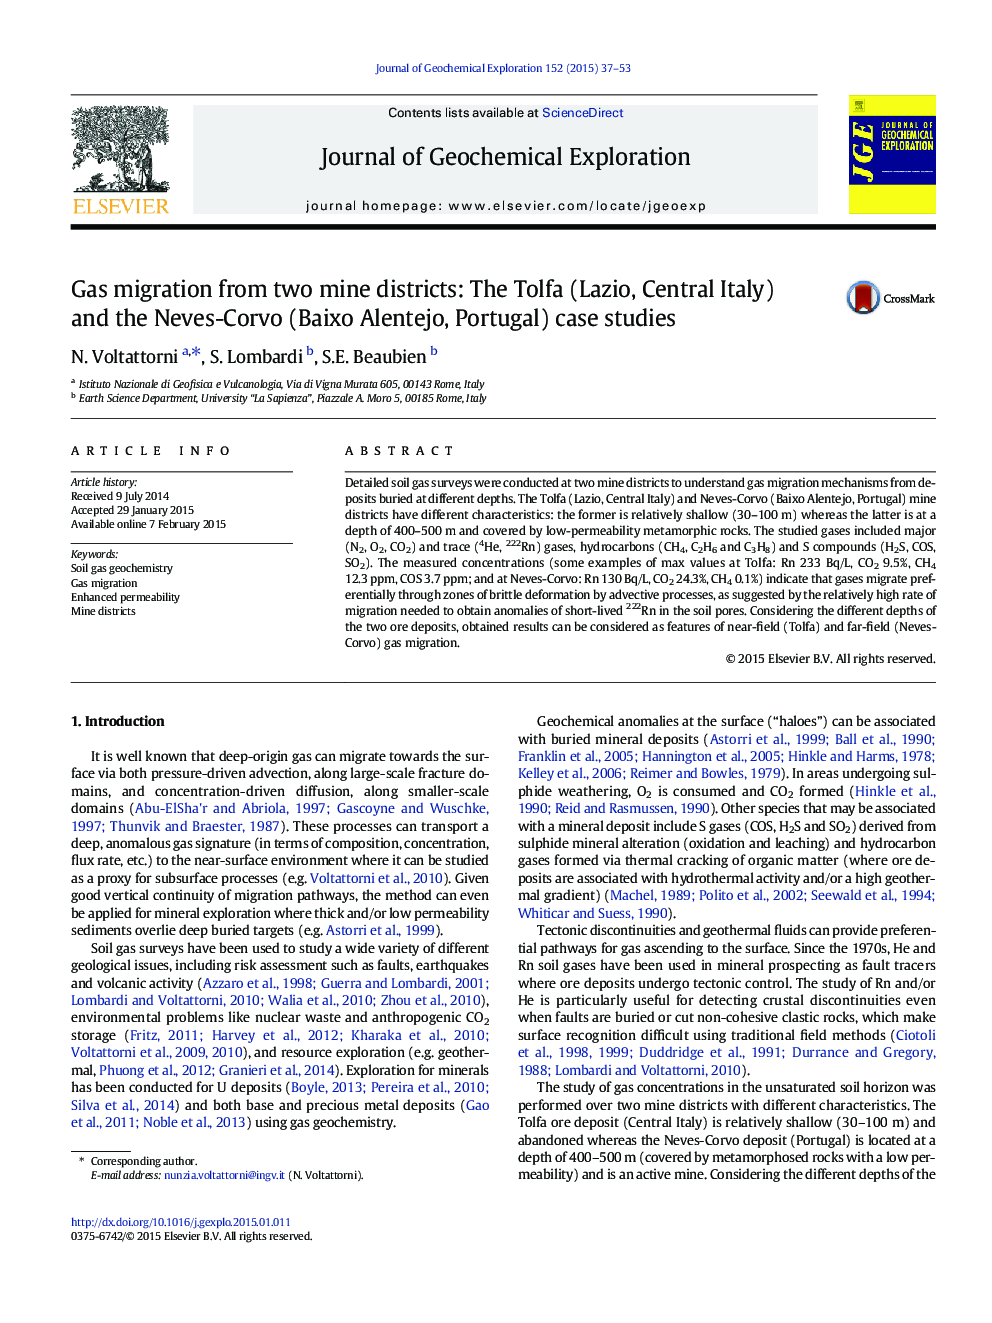 Gas migration from two mine districts: The Tolfa (Lazio, Central Italy) and the Neves-Corvo (Baixo Alentejo, Portugal) case studies